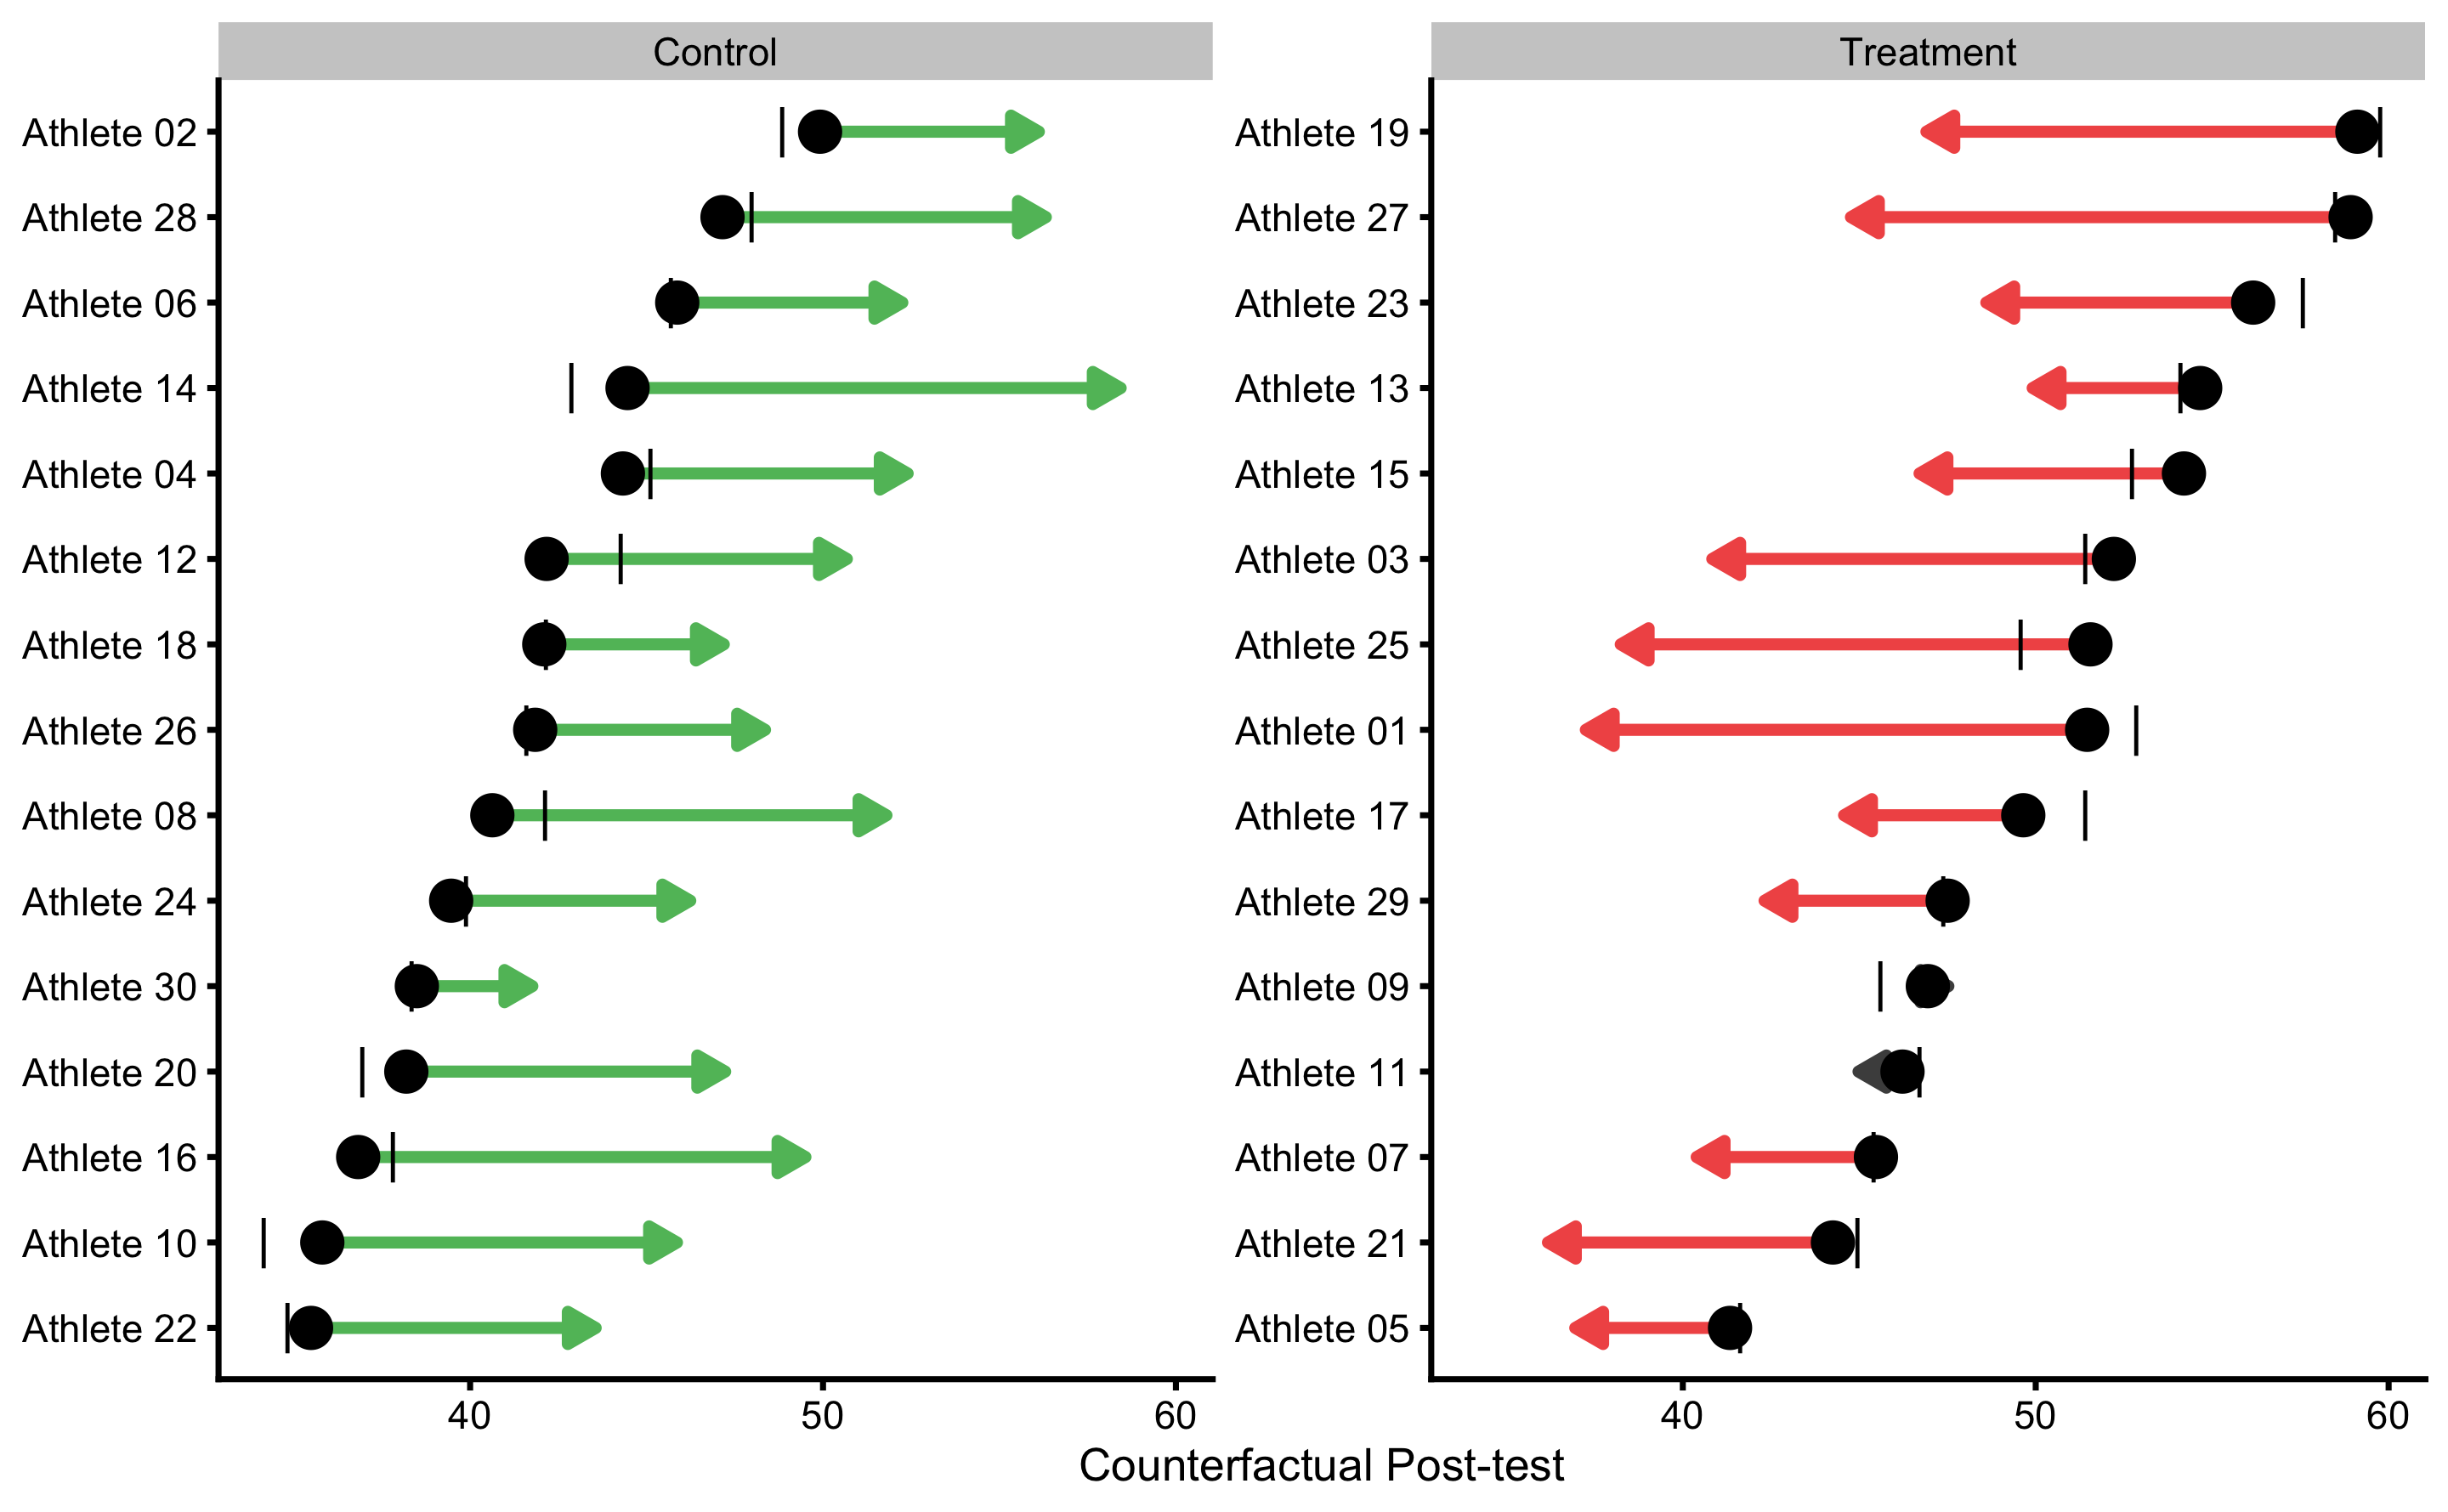 Individual counterfactual prediction when the Group changes. This way we can estimate model counterfactual predictions when the treatment changes (i.e. Controls receive treatment, and Treatment doesn’t receive treatment). Arrows thus represent model predicted Individual Treatment Effects (ITE). Vertical line indicates observed Change